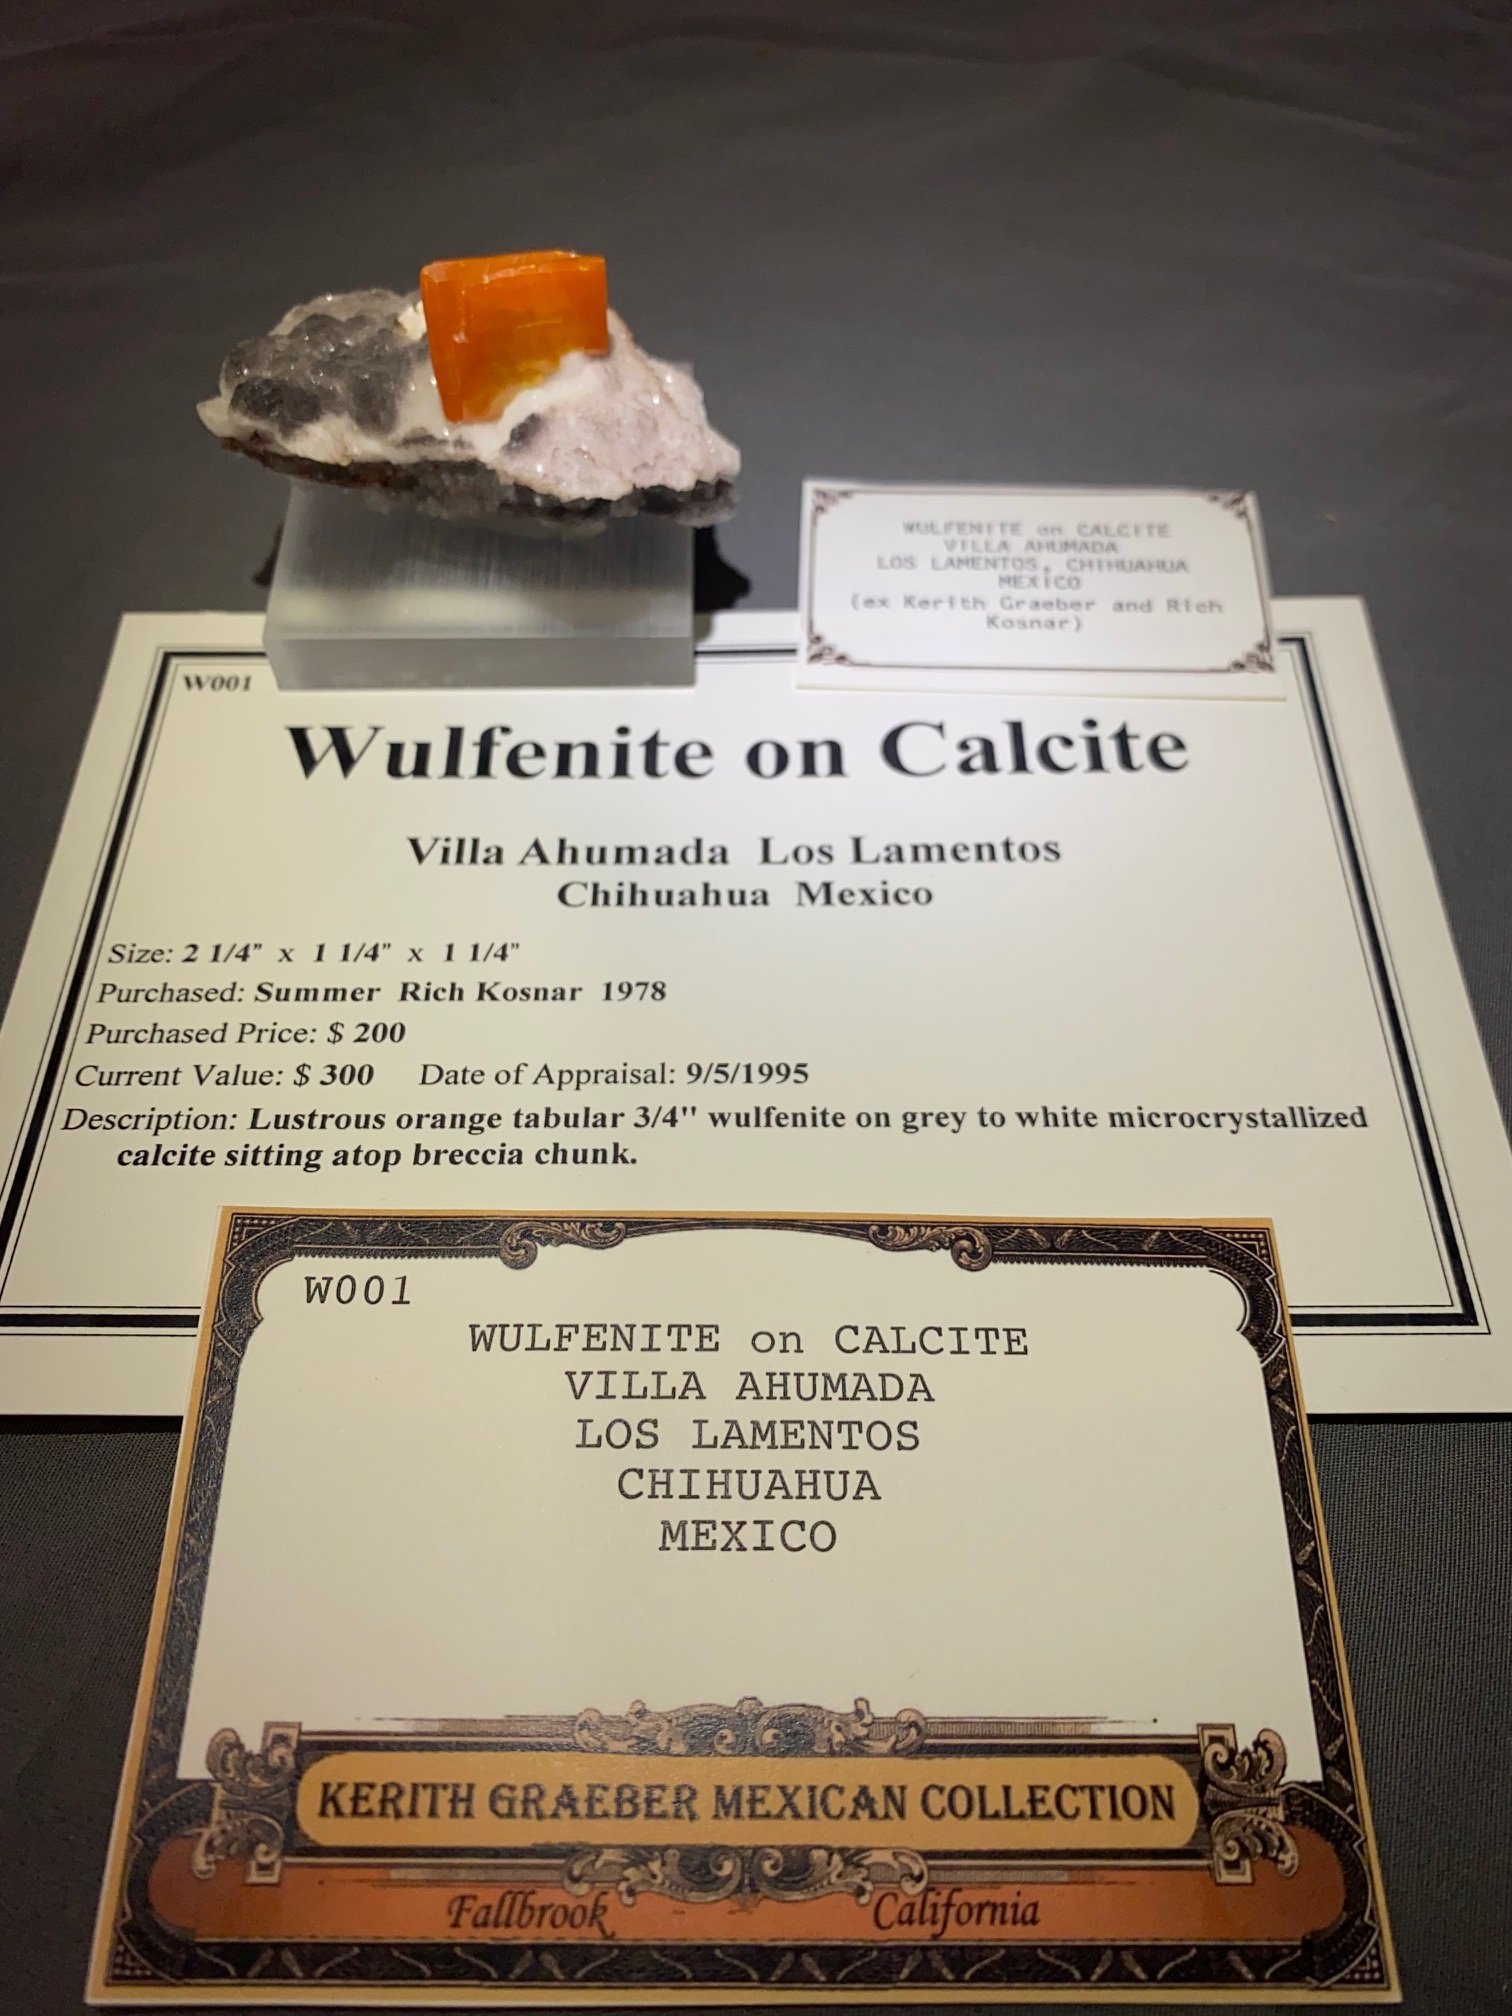 Kerith wulfenite, available